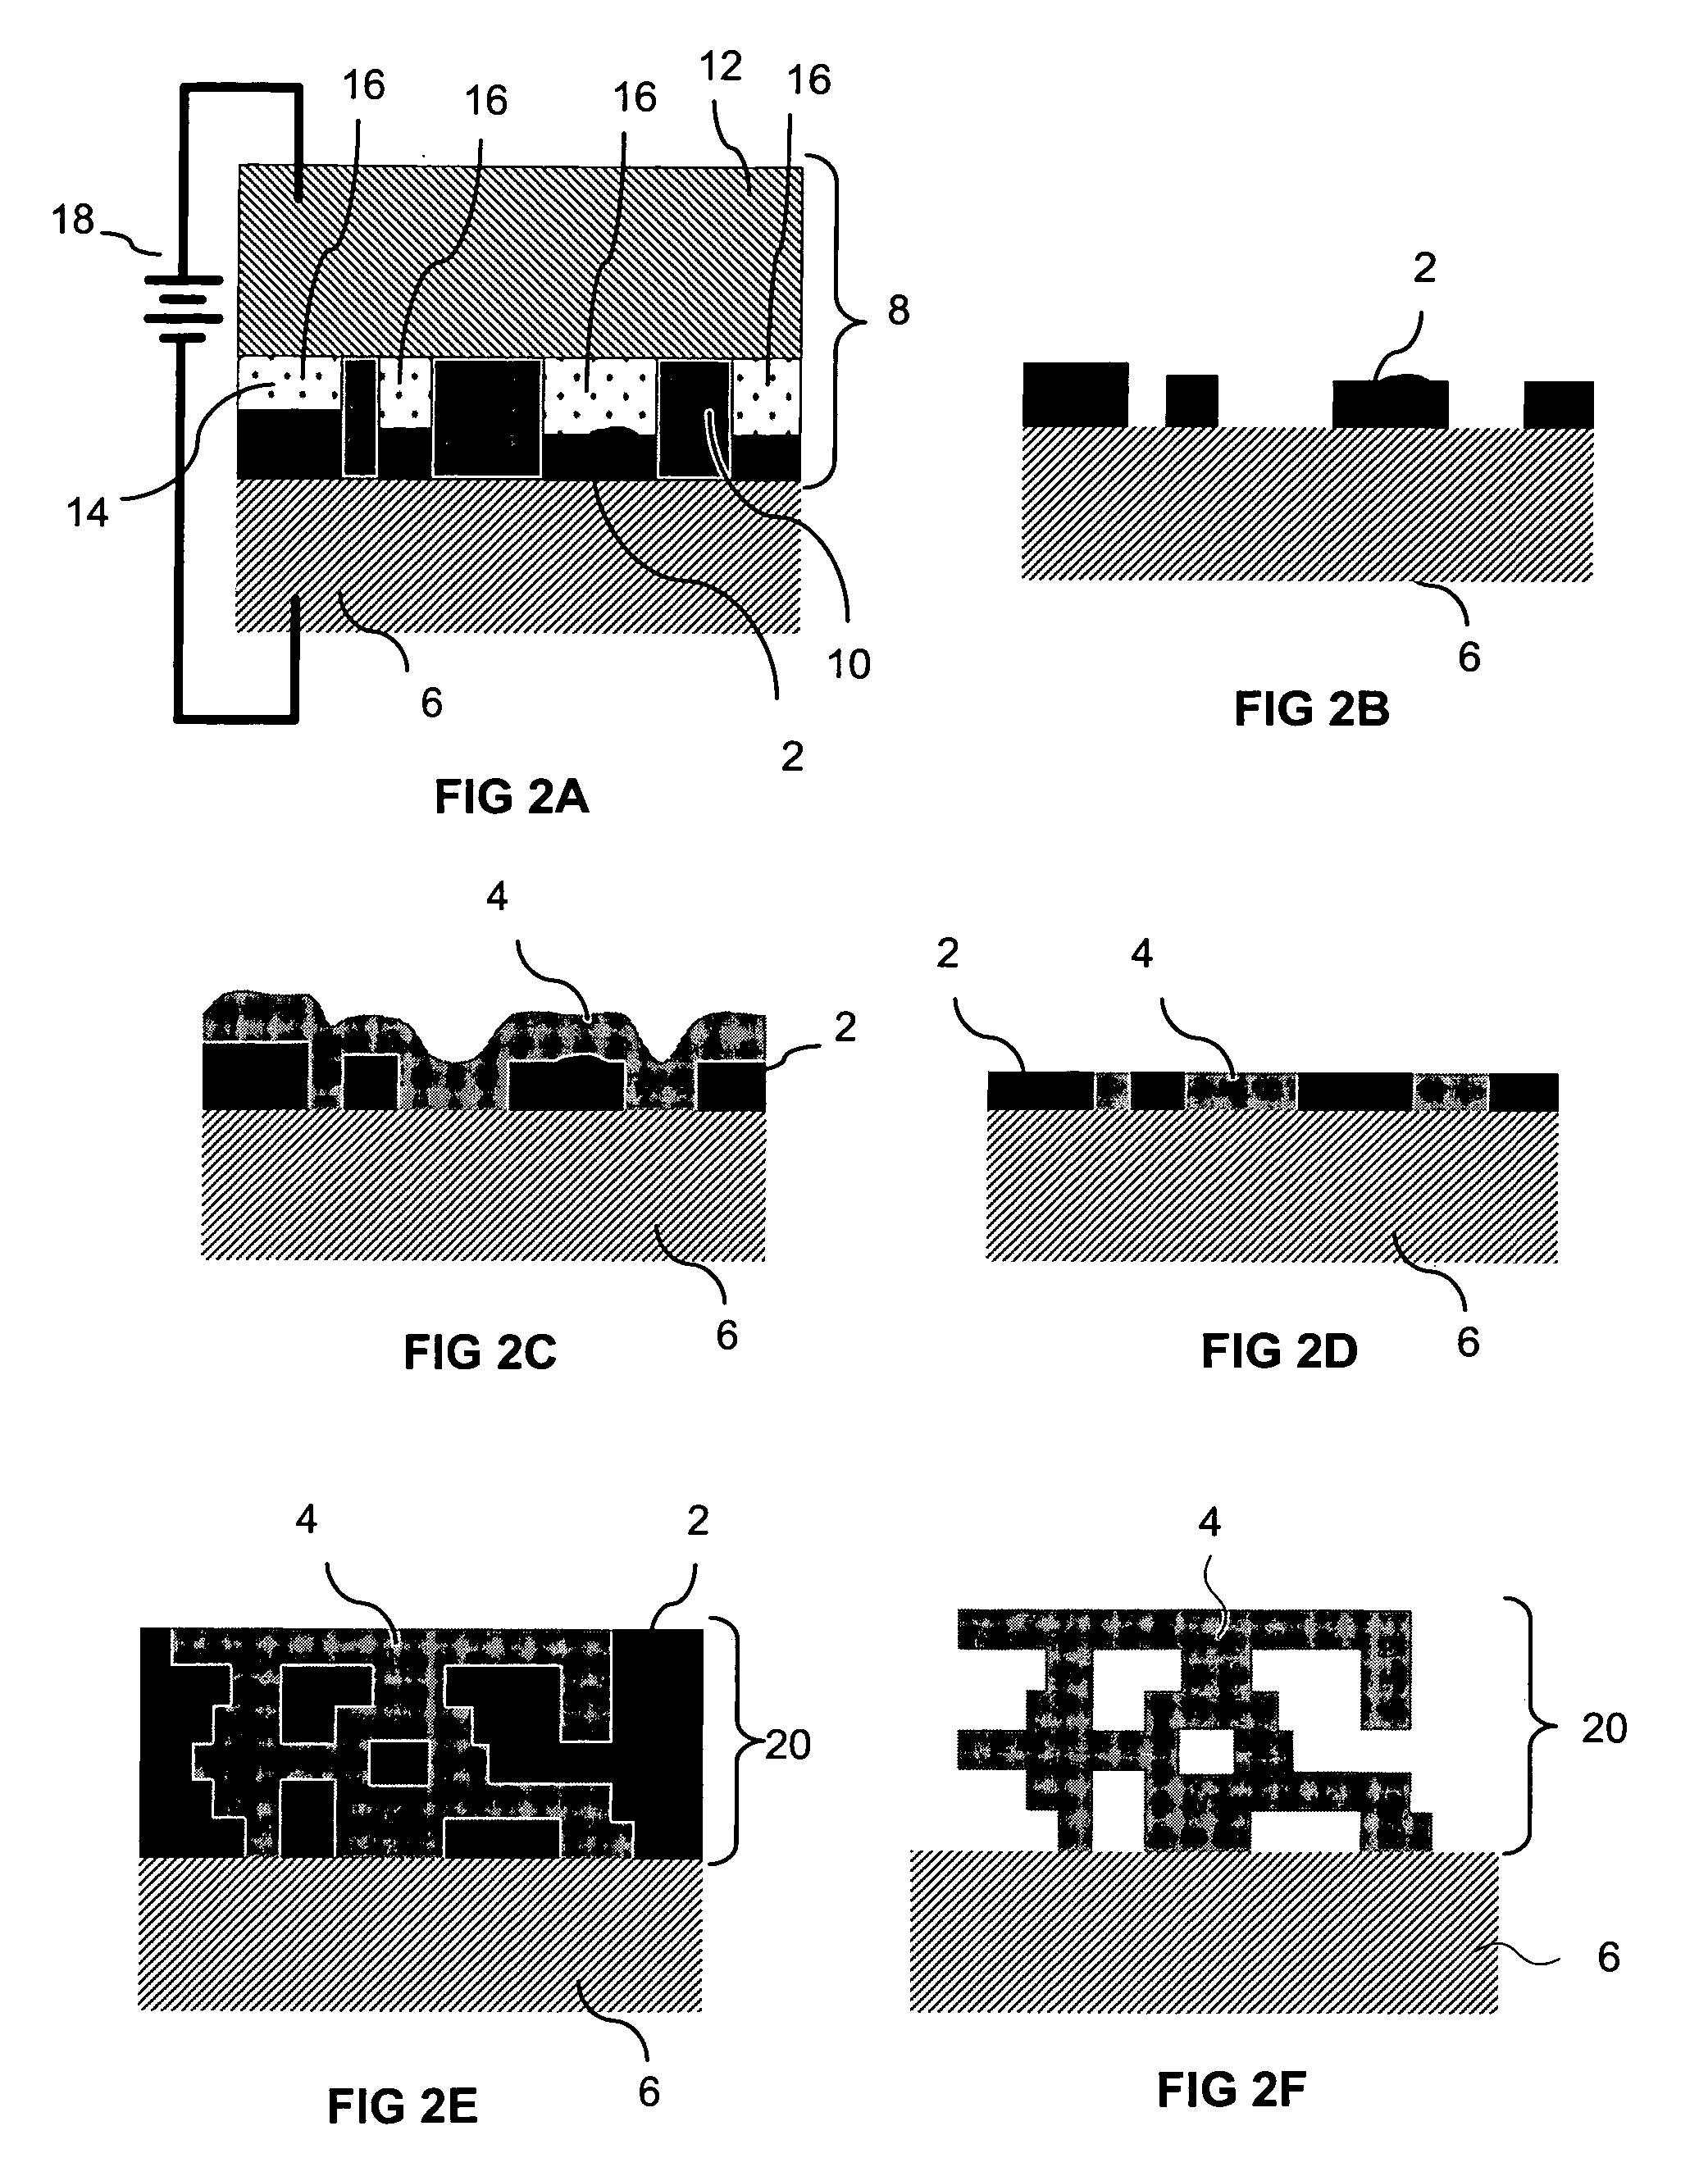 Mesoscale and microscale device fabrication methods using split structures and alignment elements